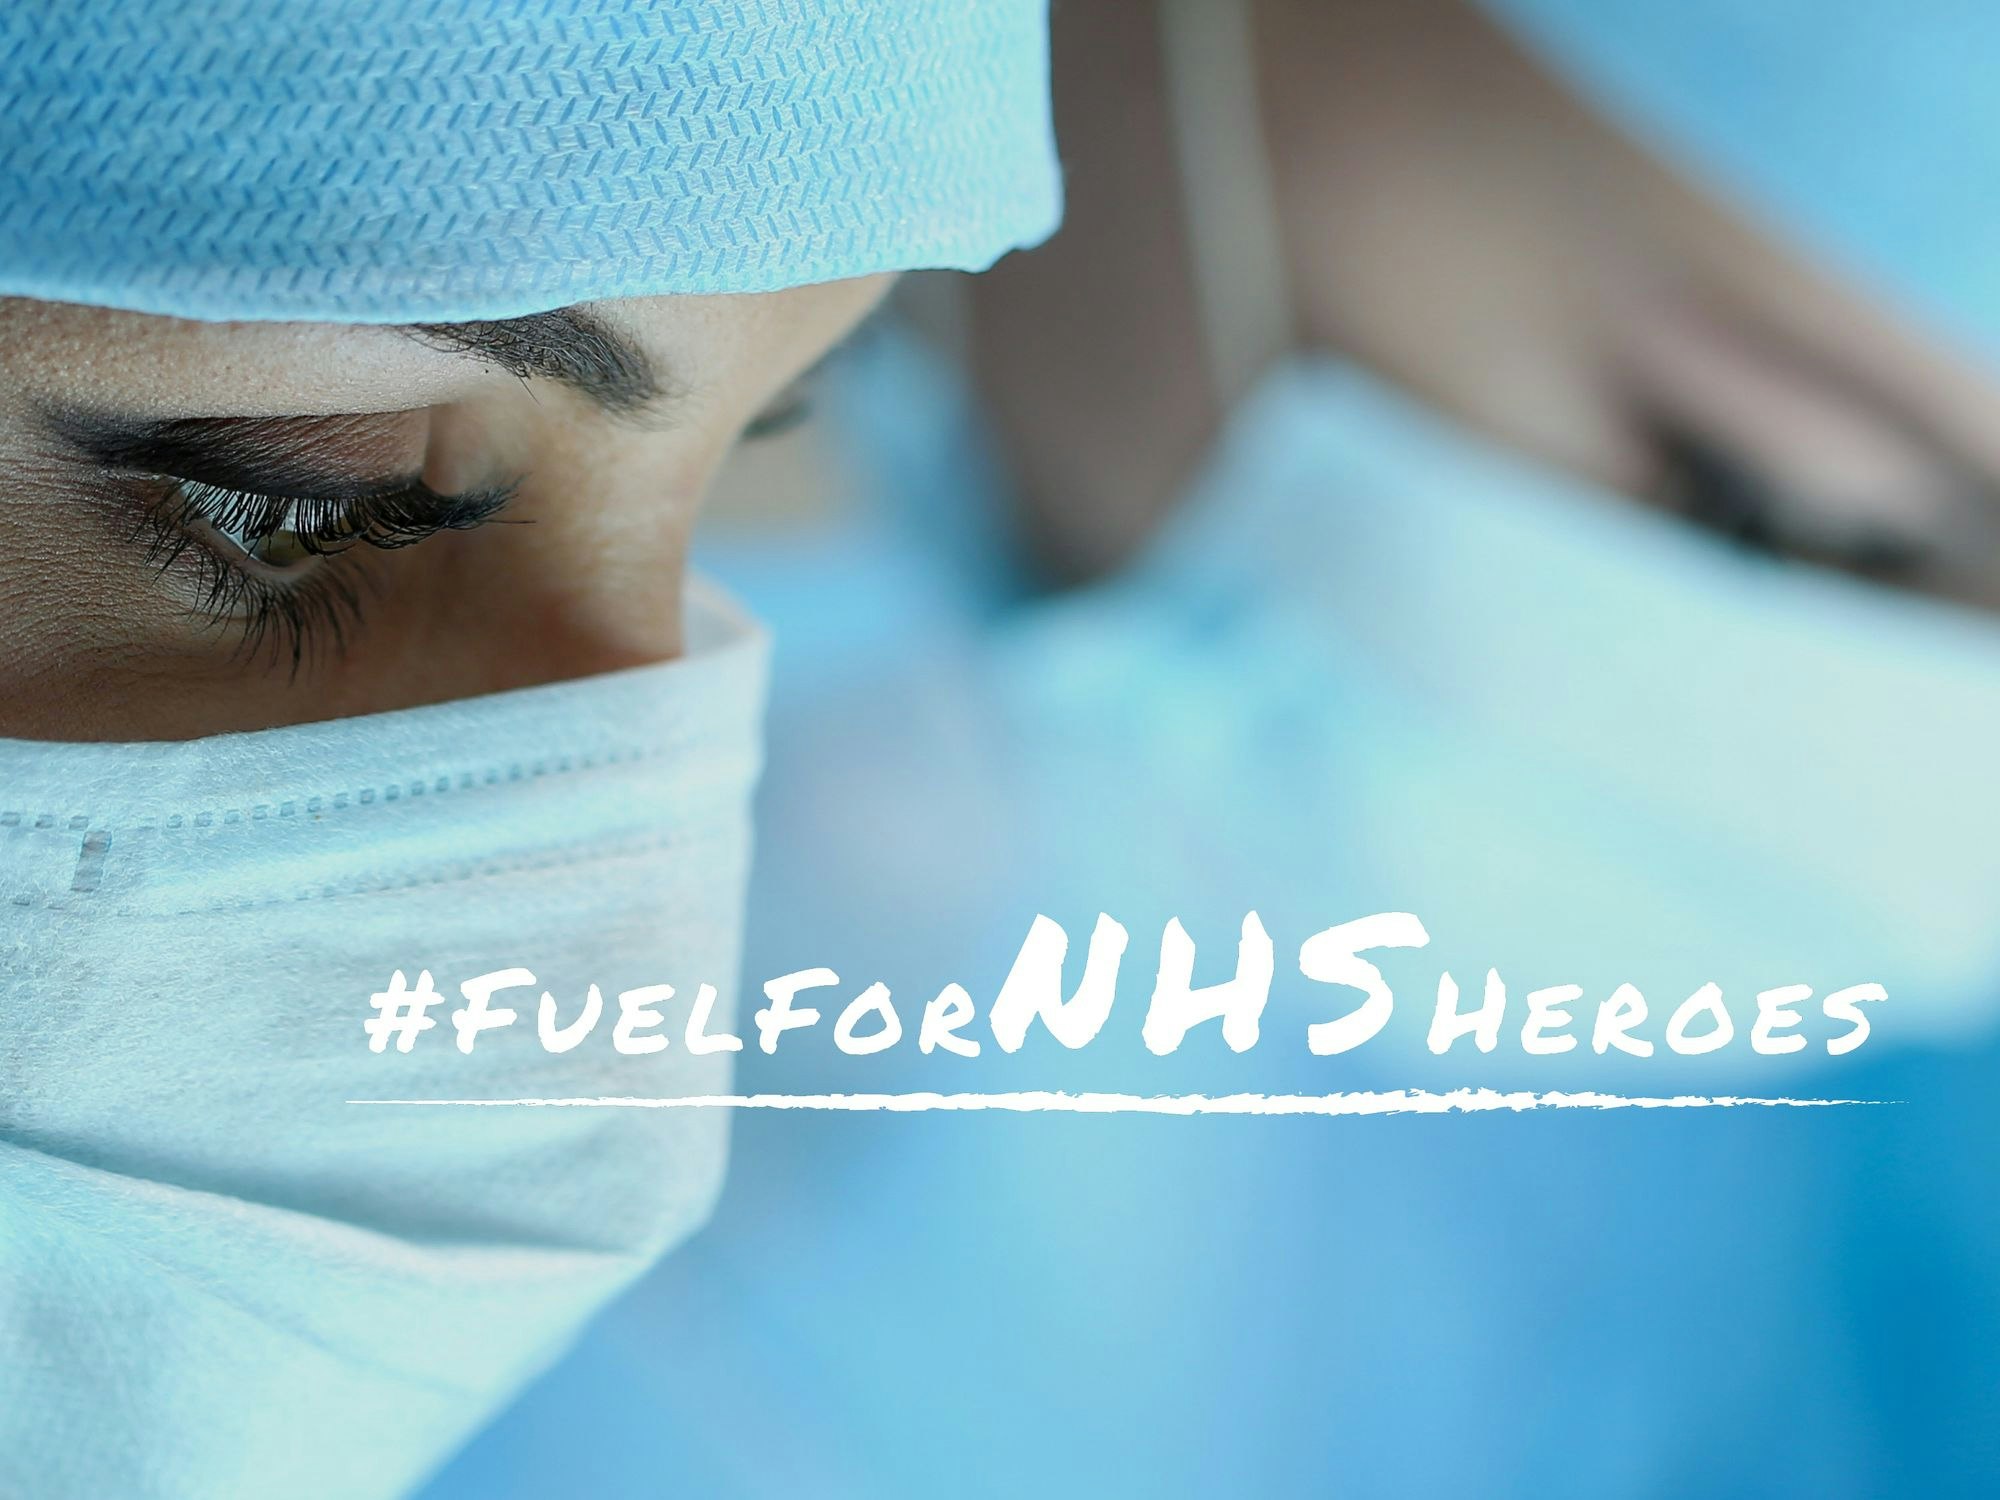 TheConduit has created the #FuelforNHSHeroes campaign to feed frontline NHS staff